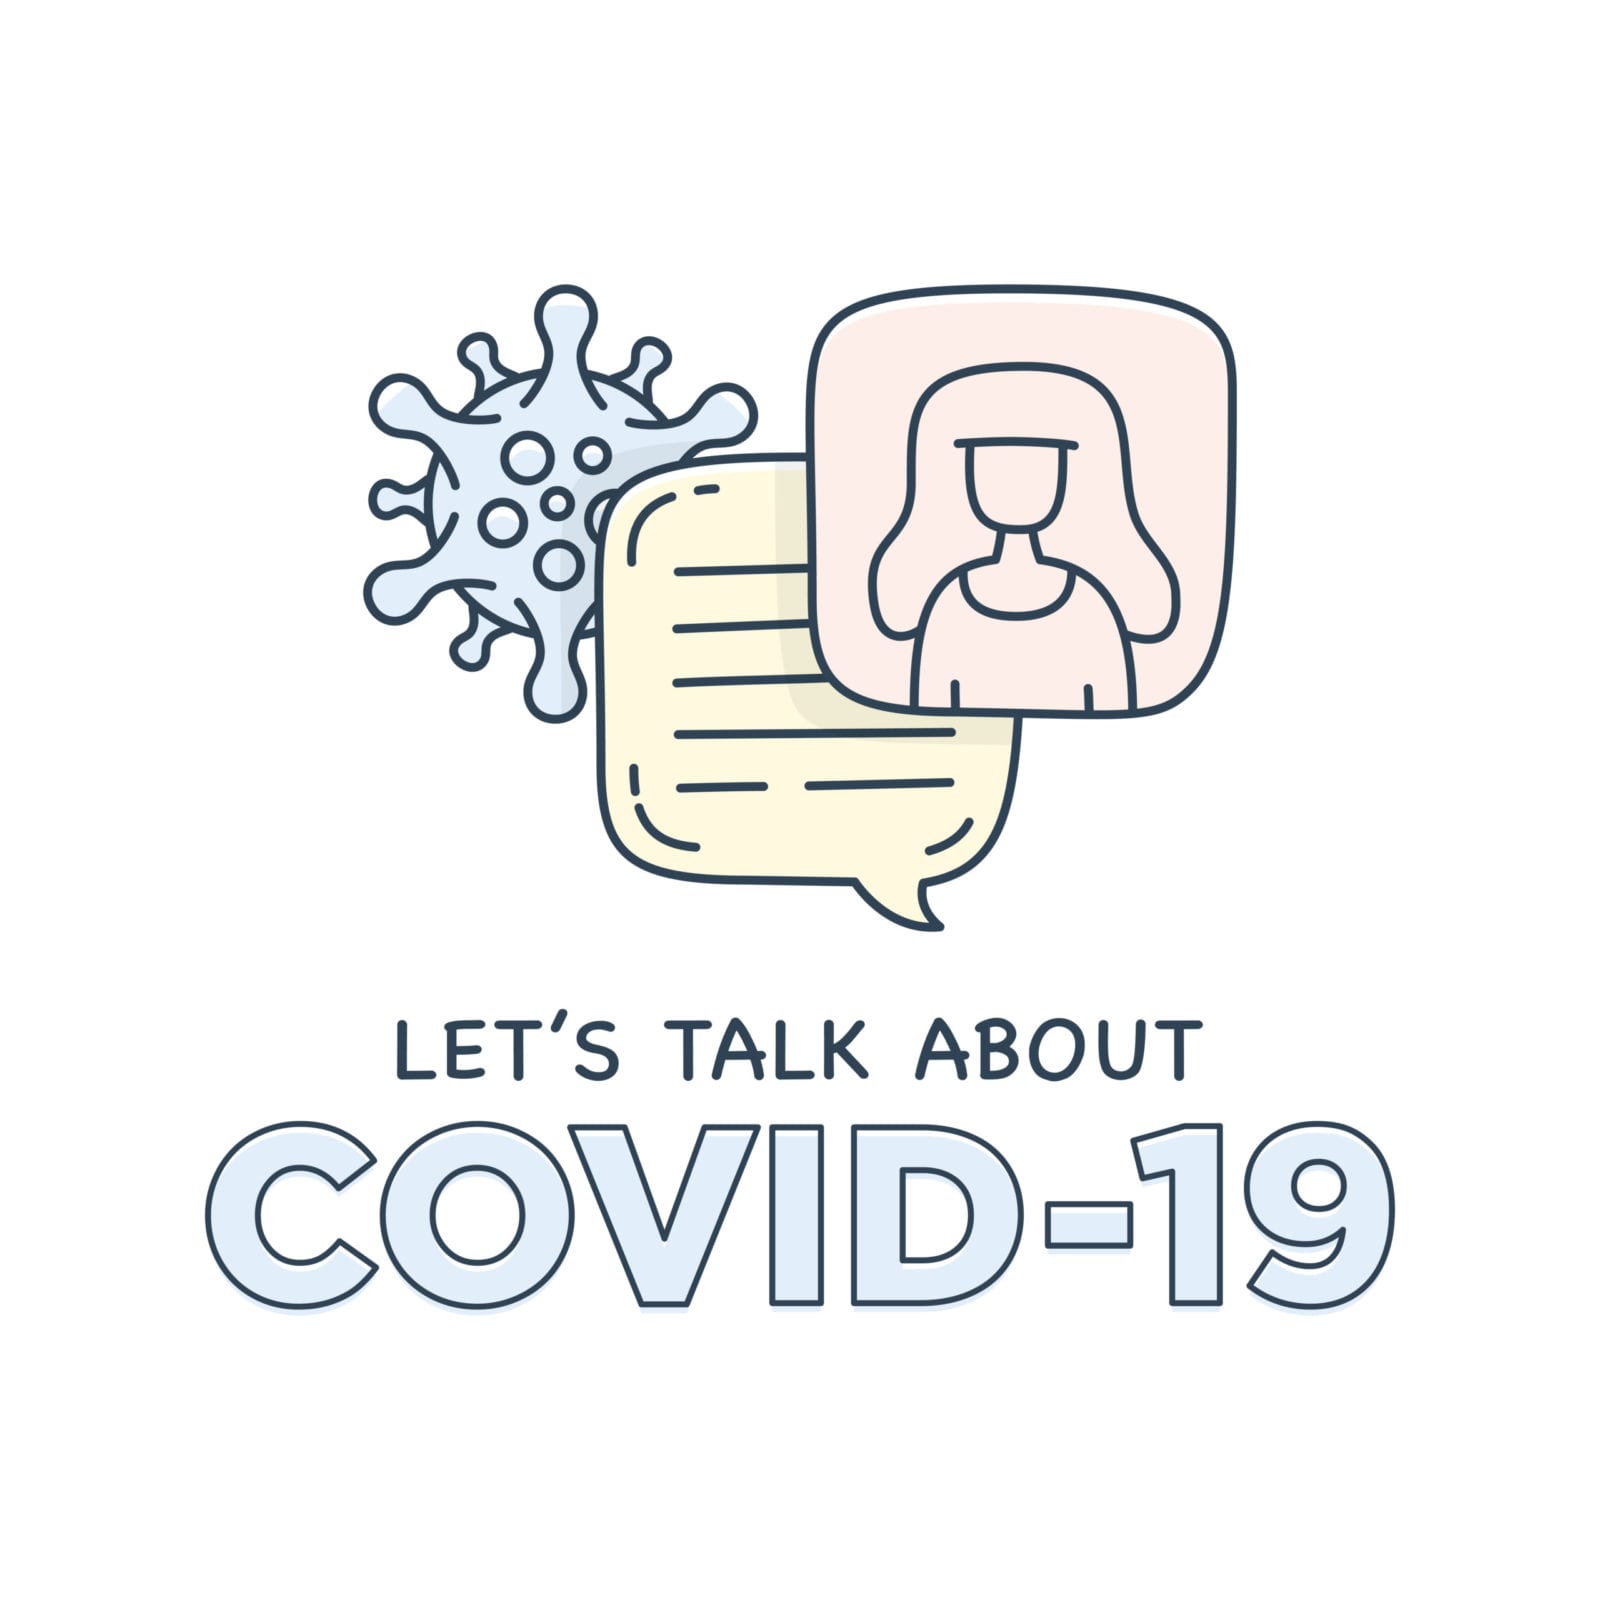 CDC requires Covid-19 test